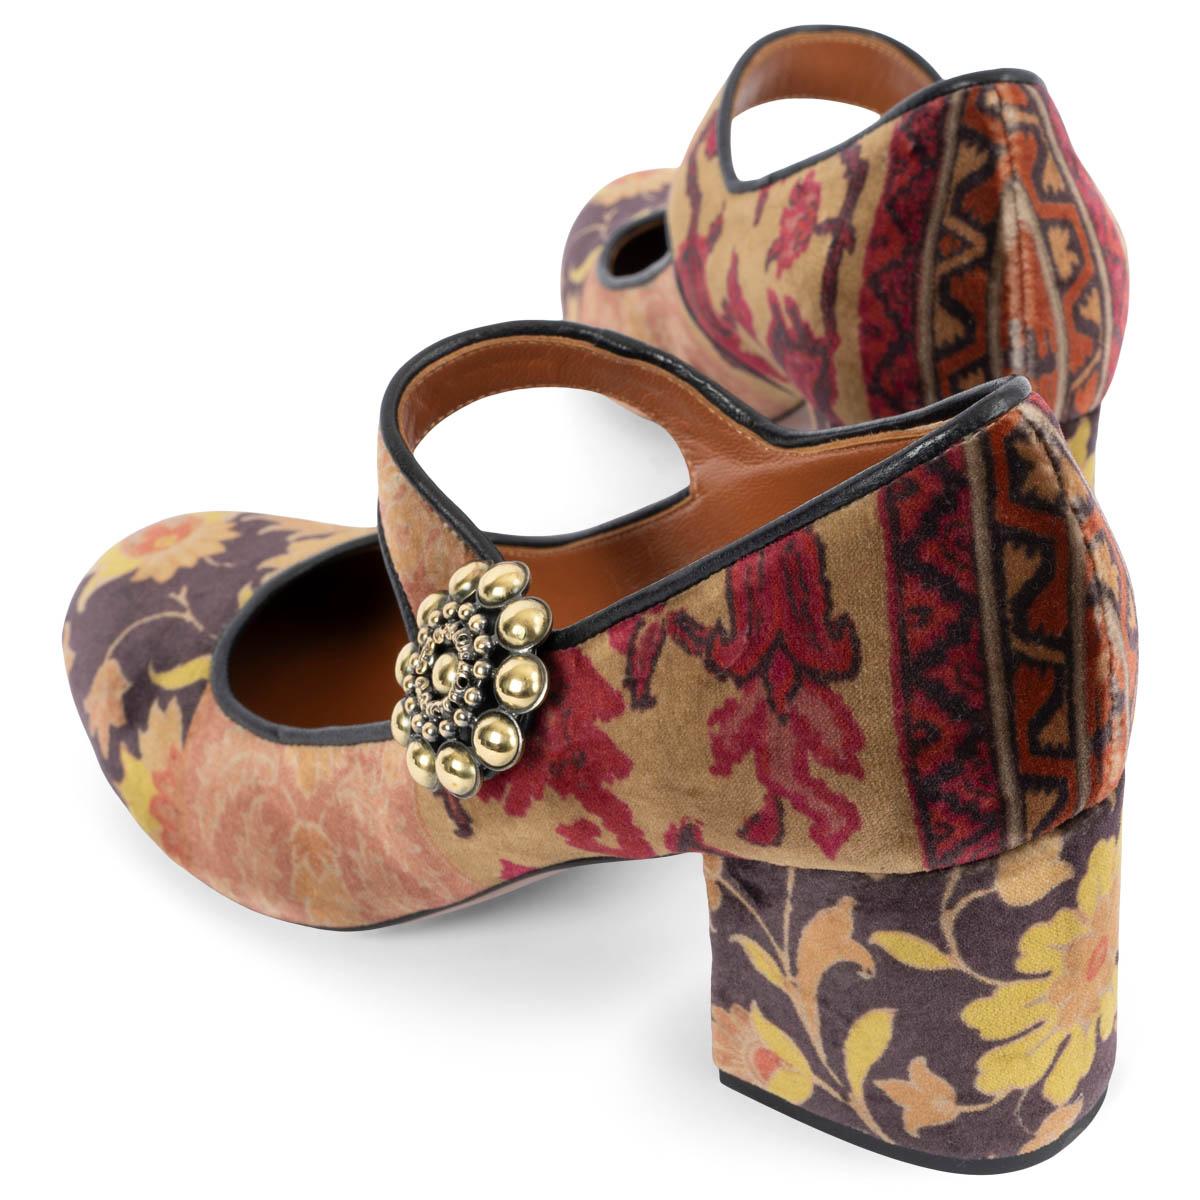 ETRO earthy FLORAL VELVET MARY JANE Pumps Shoes 38 2